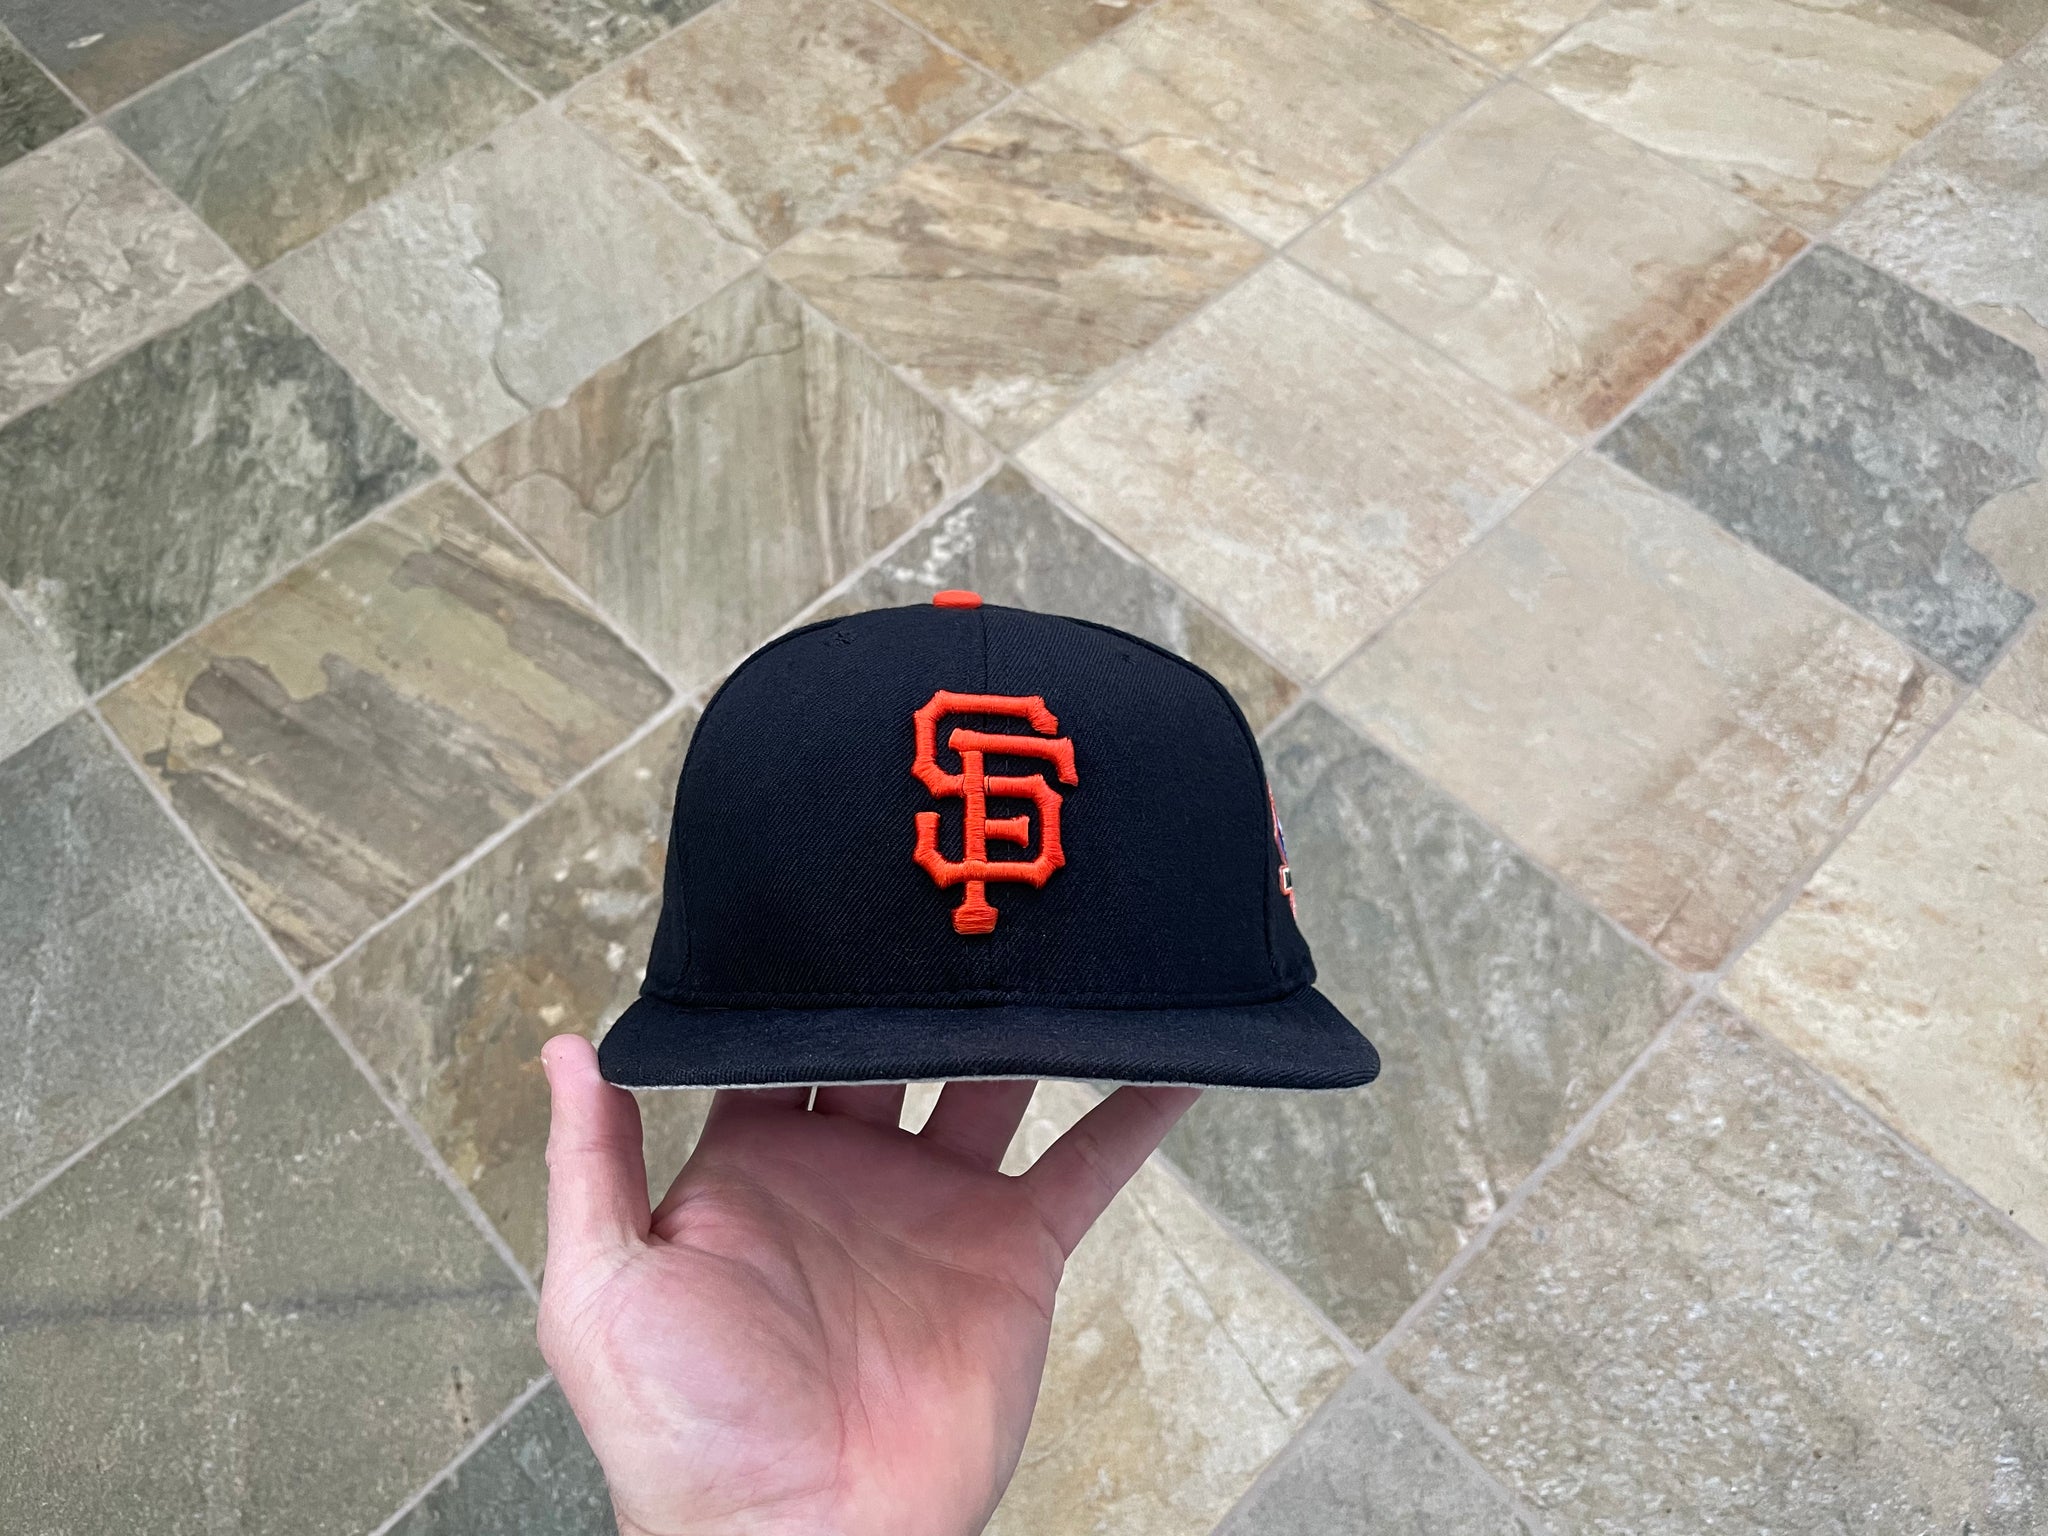 Baseball posters, new cap, beenie, shirts, SF Giants gear -need to